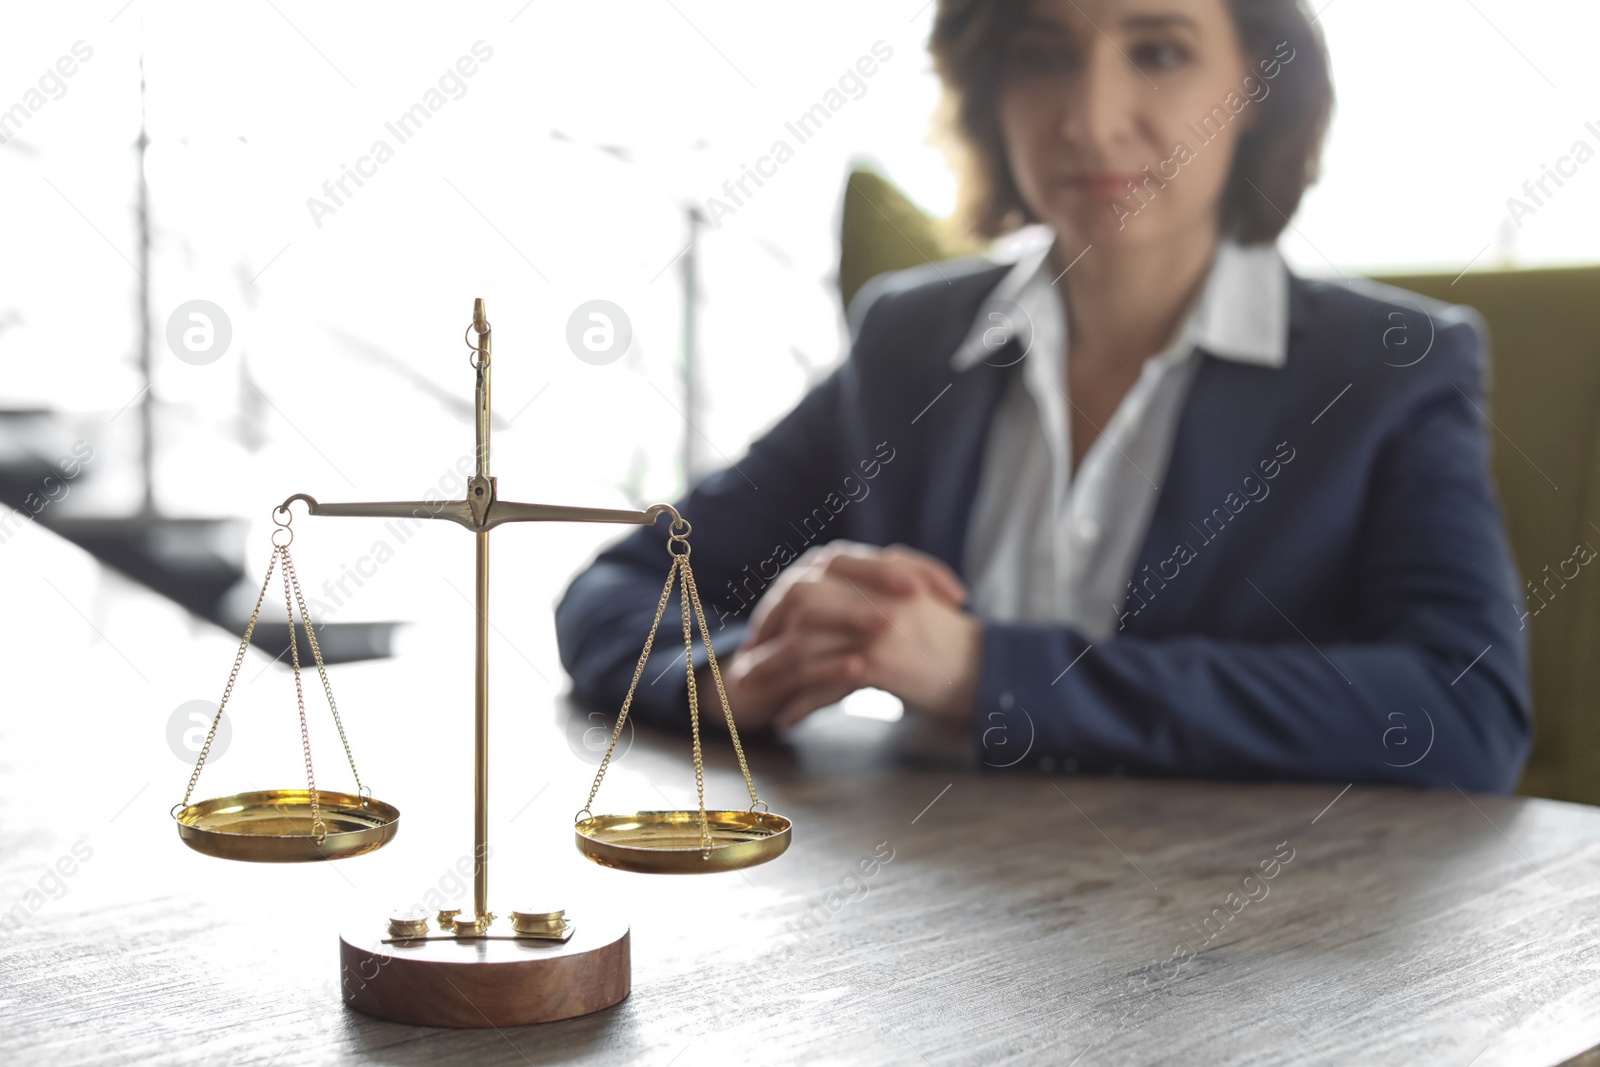 Photo of Scales on table and lawyer in office